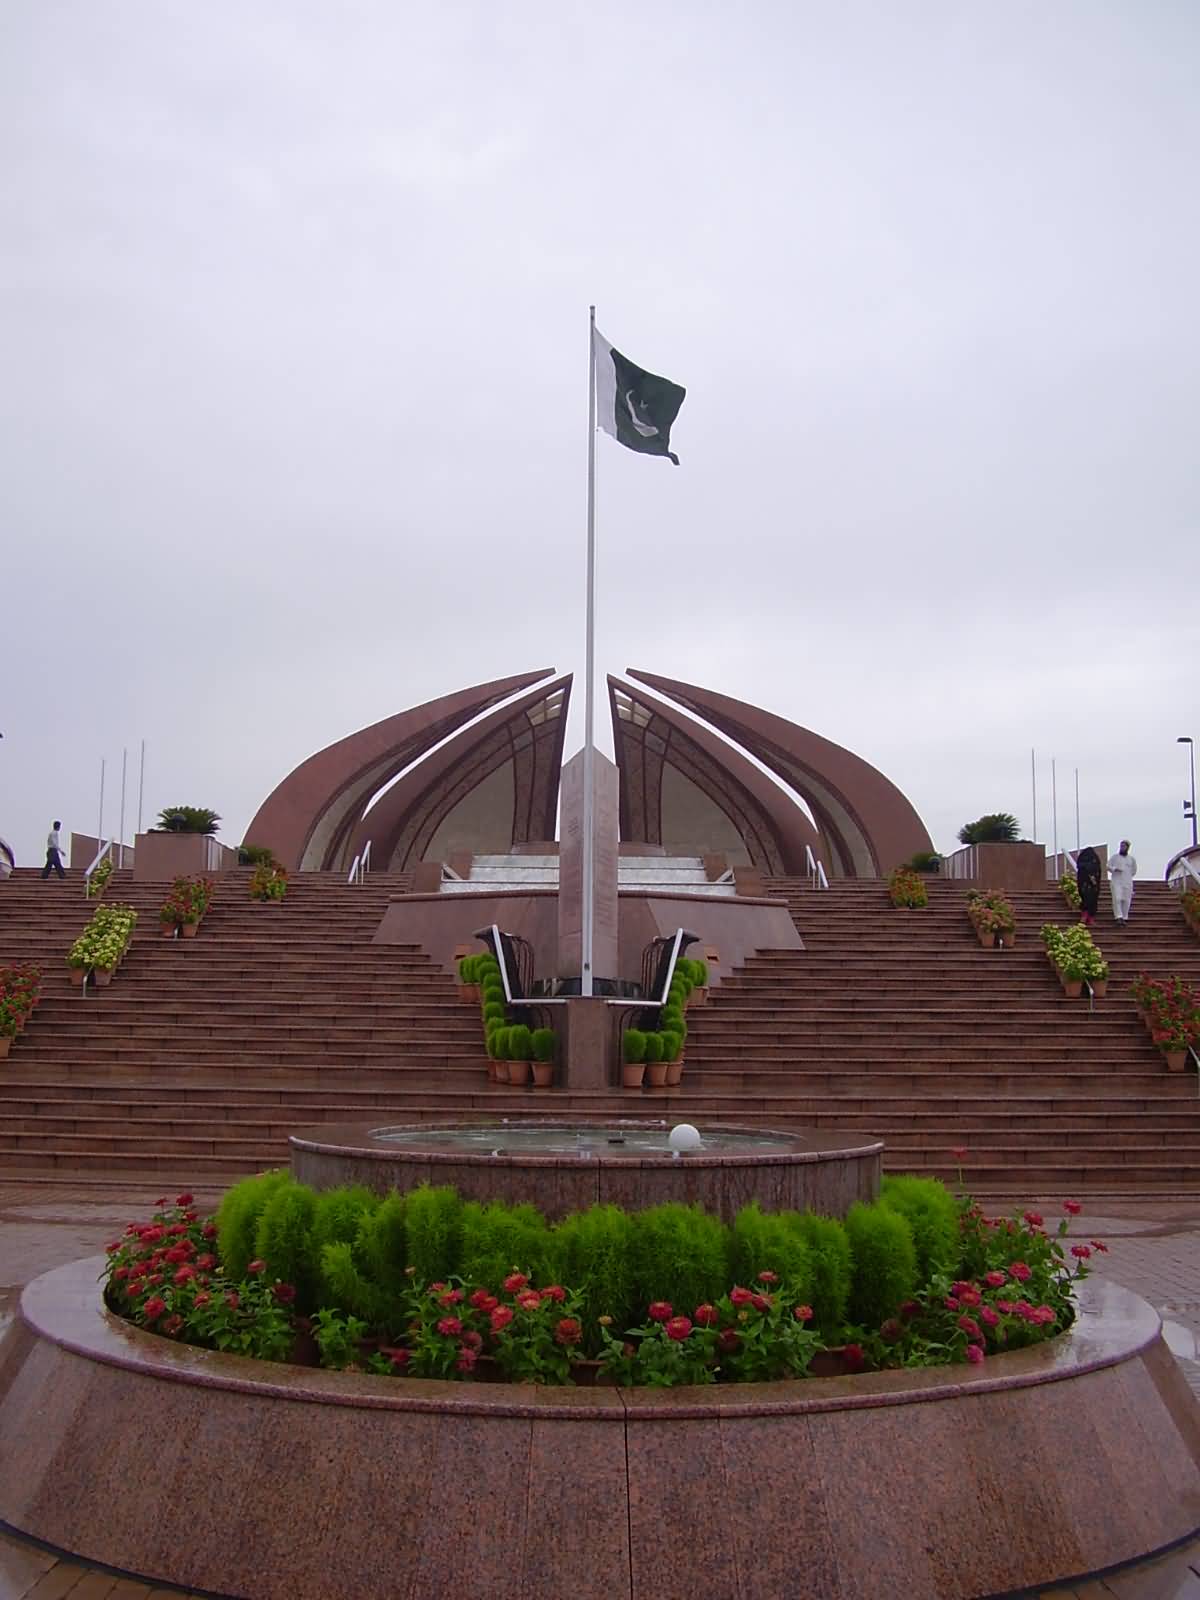 The Flag Of Pakistan Hoisted At The Top Of National Monument During Independence Day Celebration